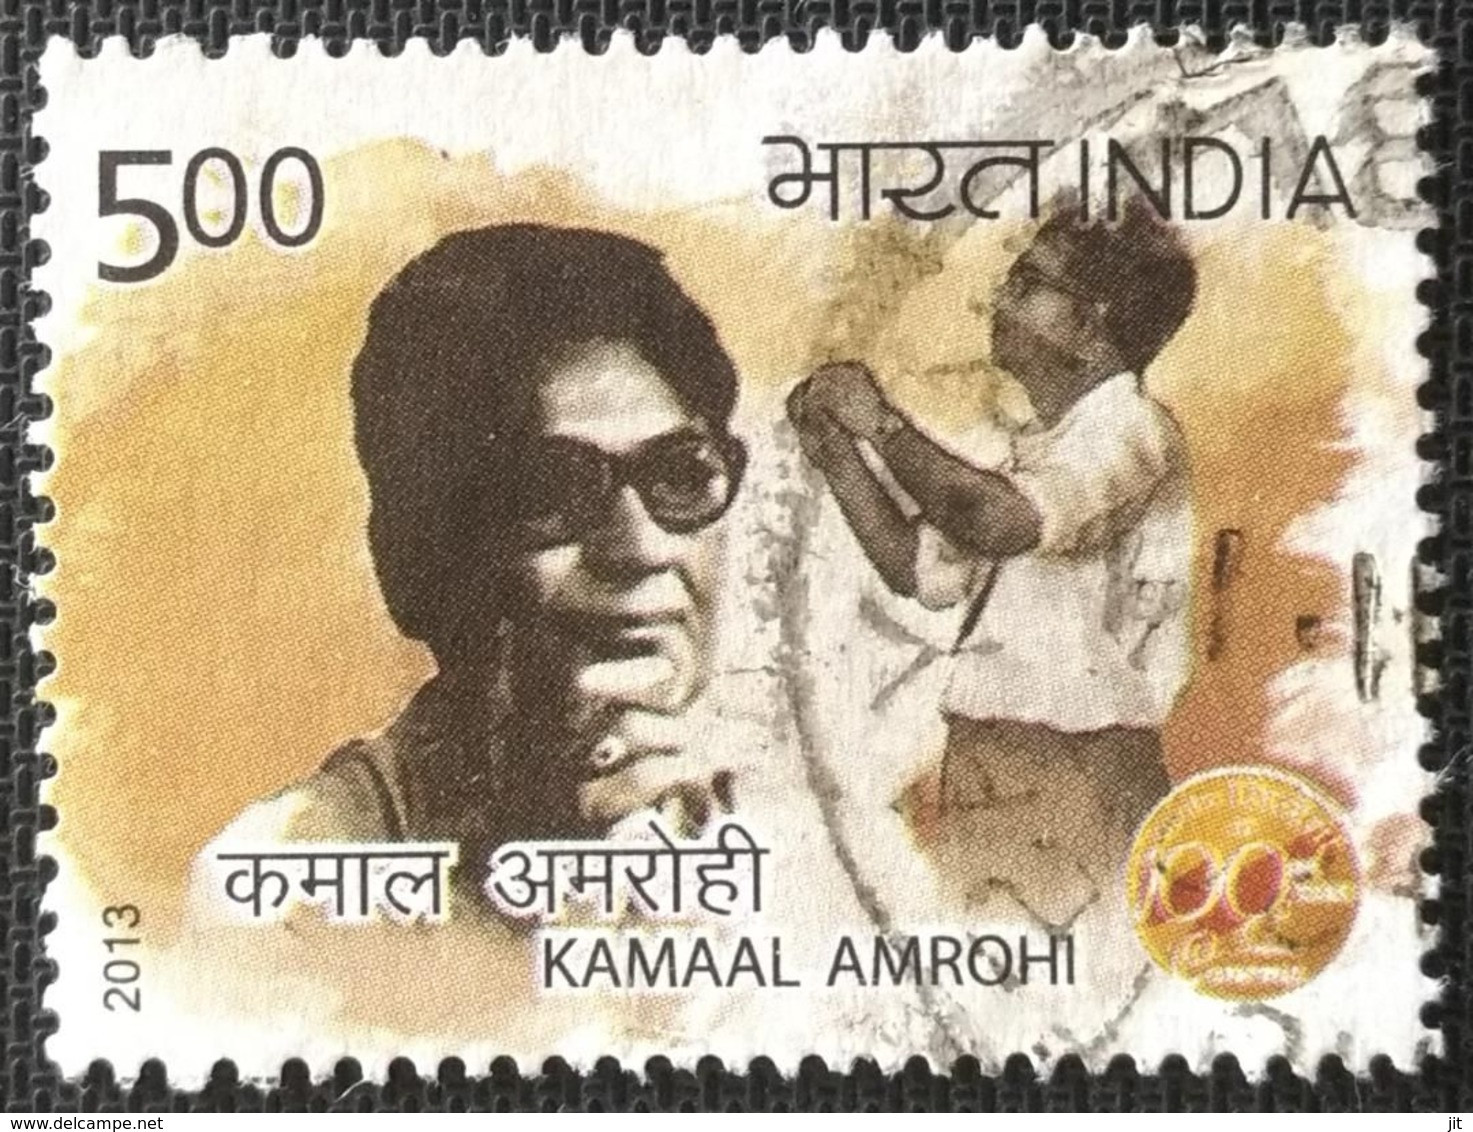 022. INDIA 2013 USED STAMP 100 YEARS OF INDIAN CINEMA (KAMAAL AMROHI) - Oblitérés